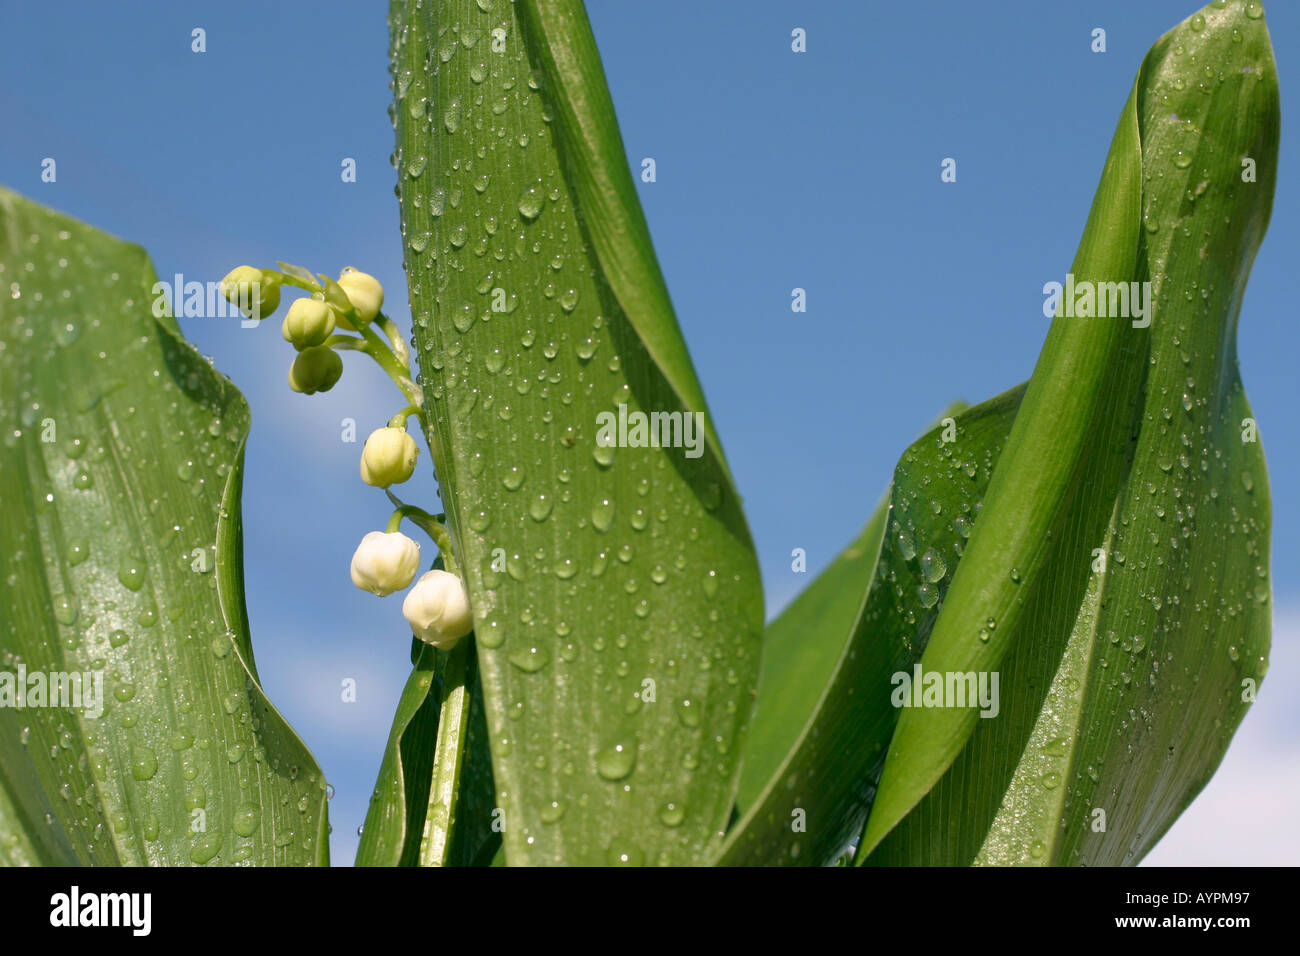 Small white buds blossom amidst wet leaves as water droplets form on them Stock Photo